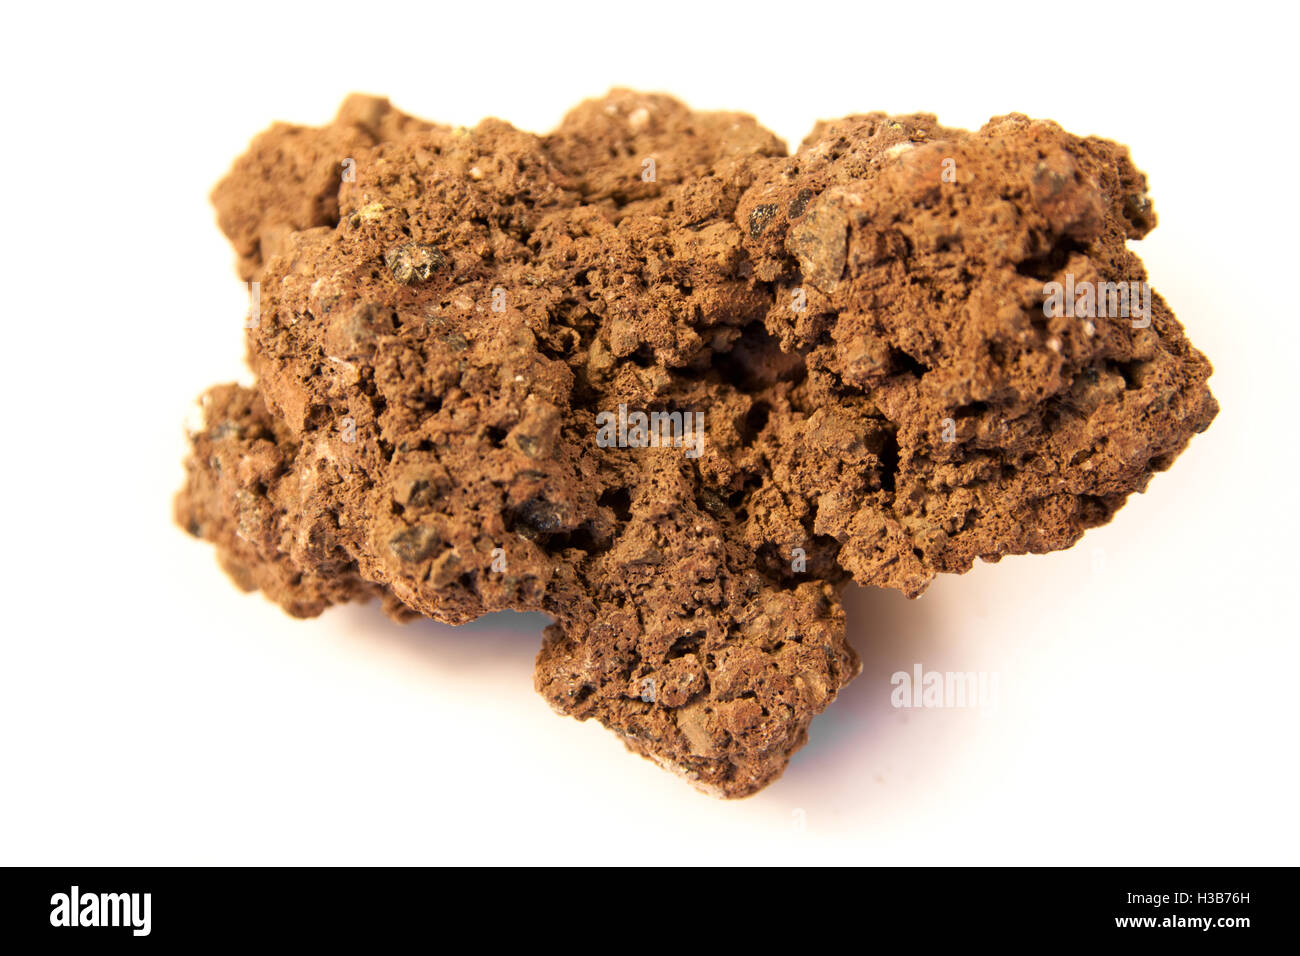 macro shot of a fine grained, extremely vesicular volcanic rock called pumice Stock Photo